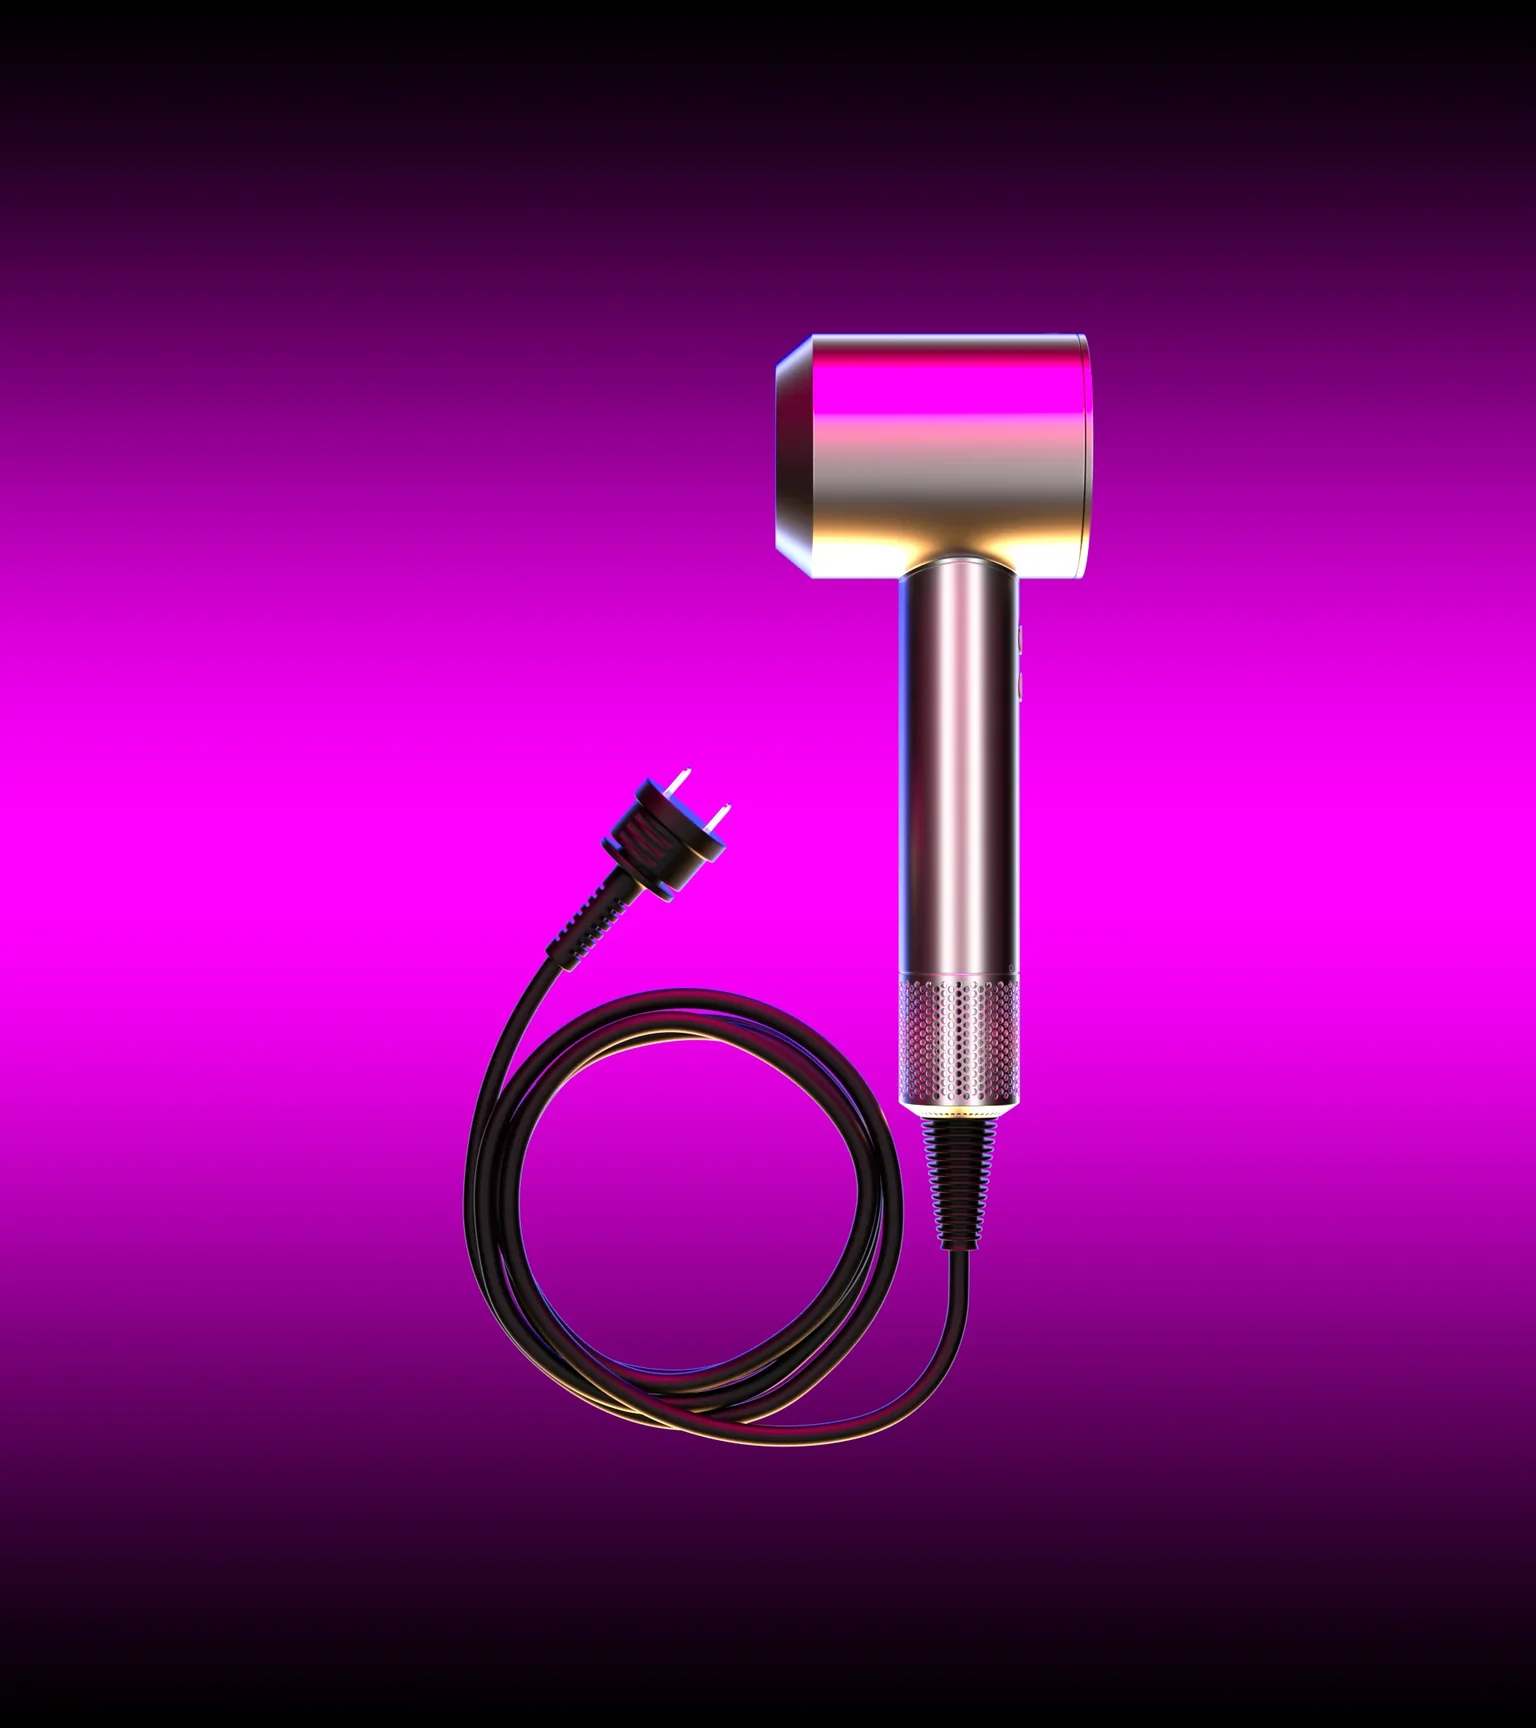 Pink gradient background with 3D rendering of a Dyson blowdryer.